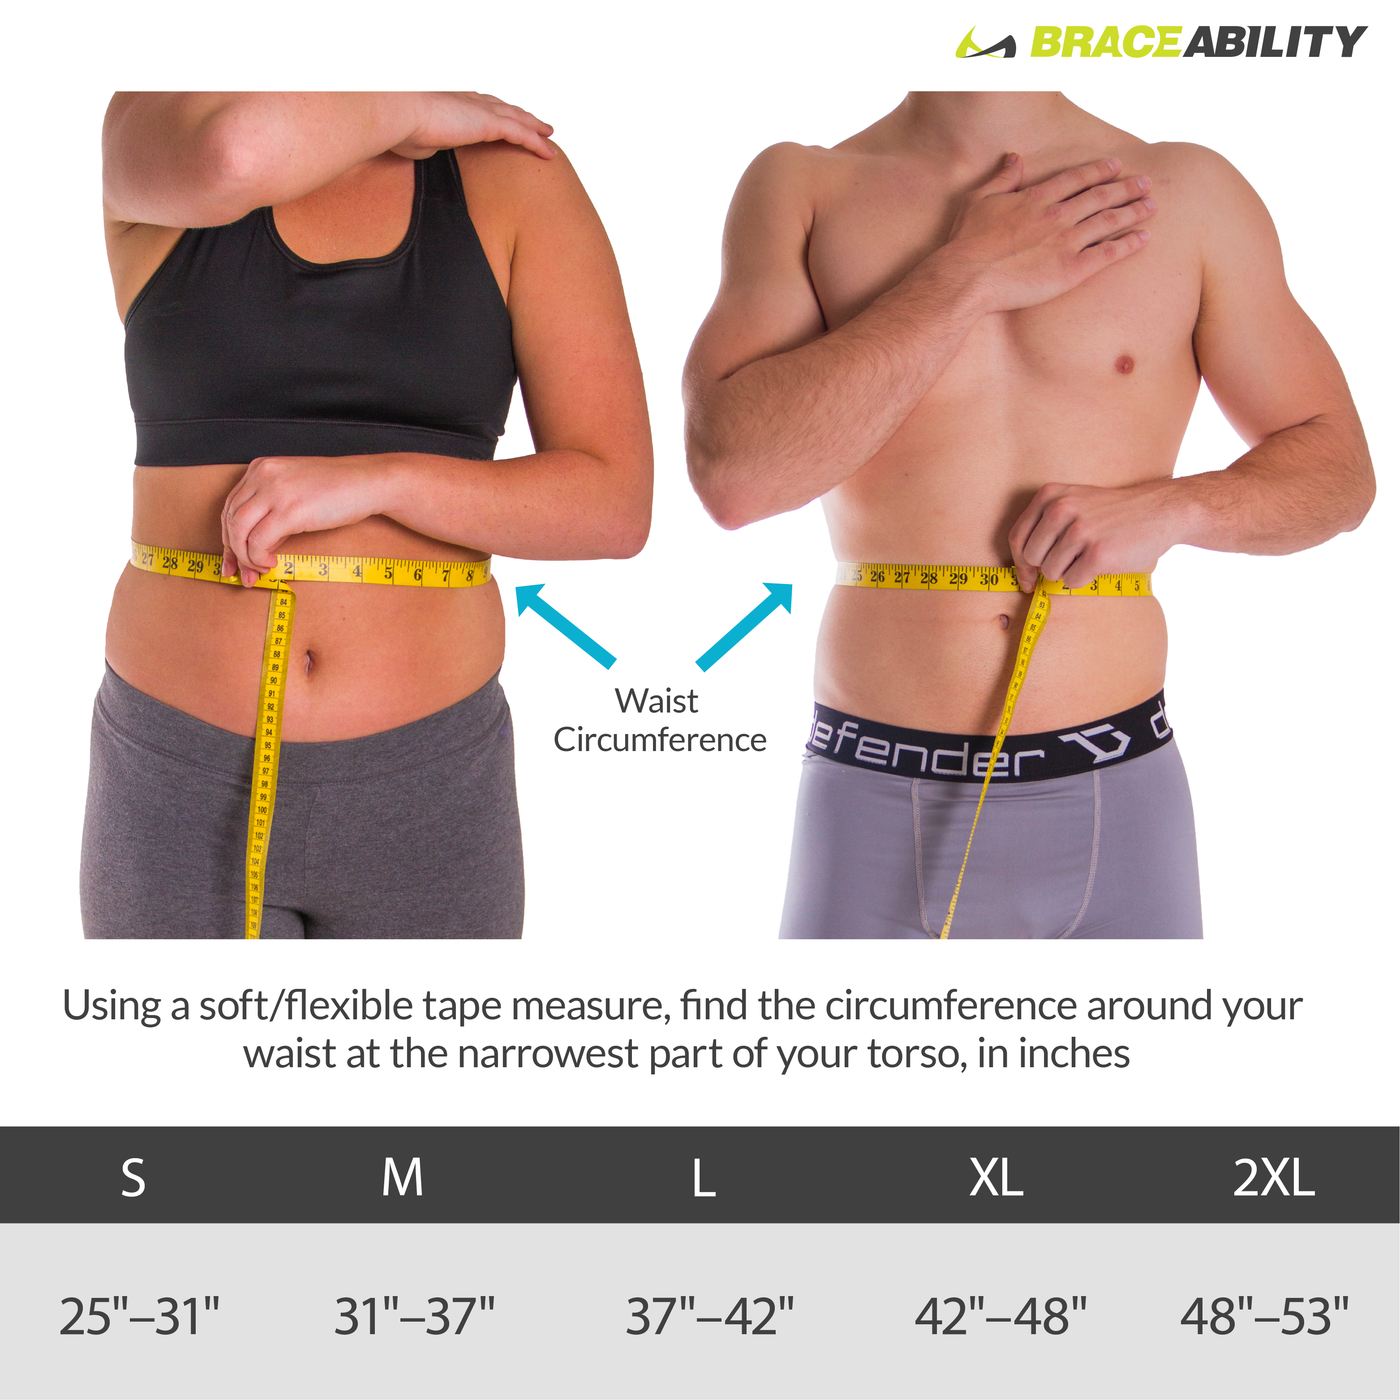 the sizing chart for the decompression back belt fits small through 2xl